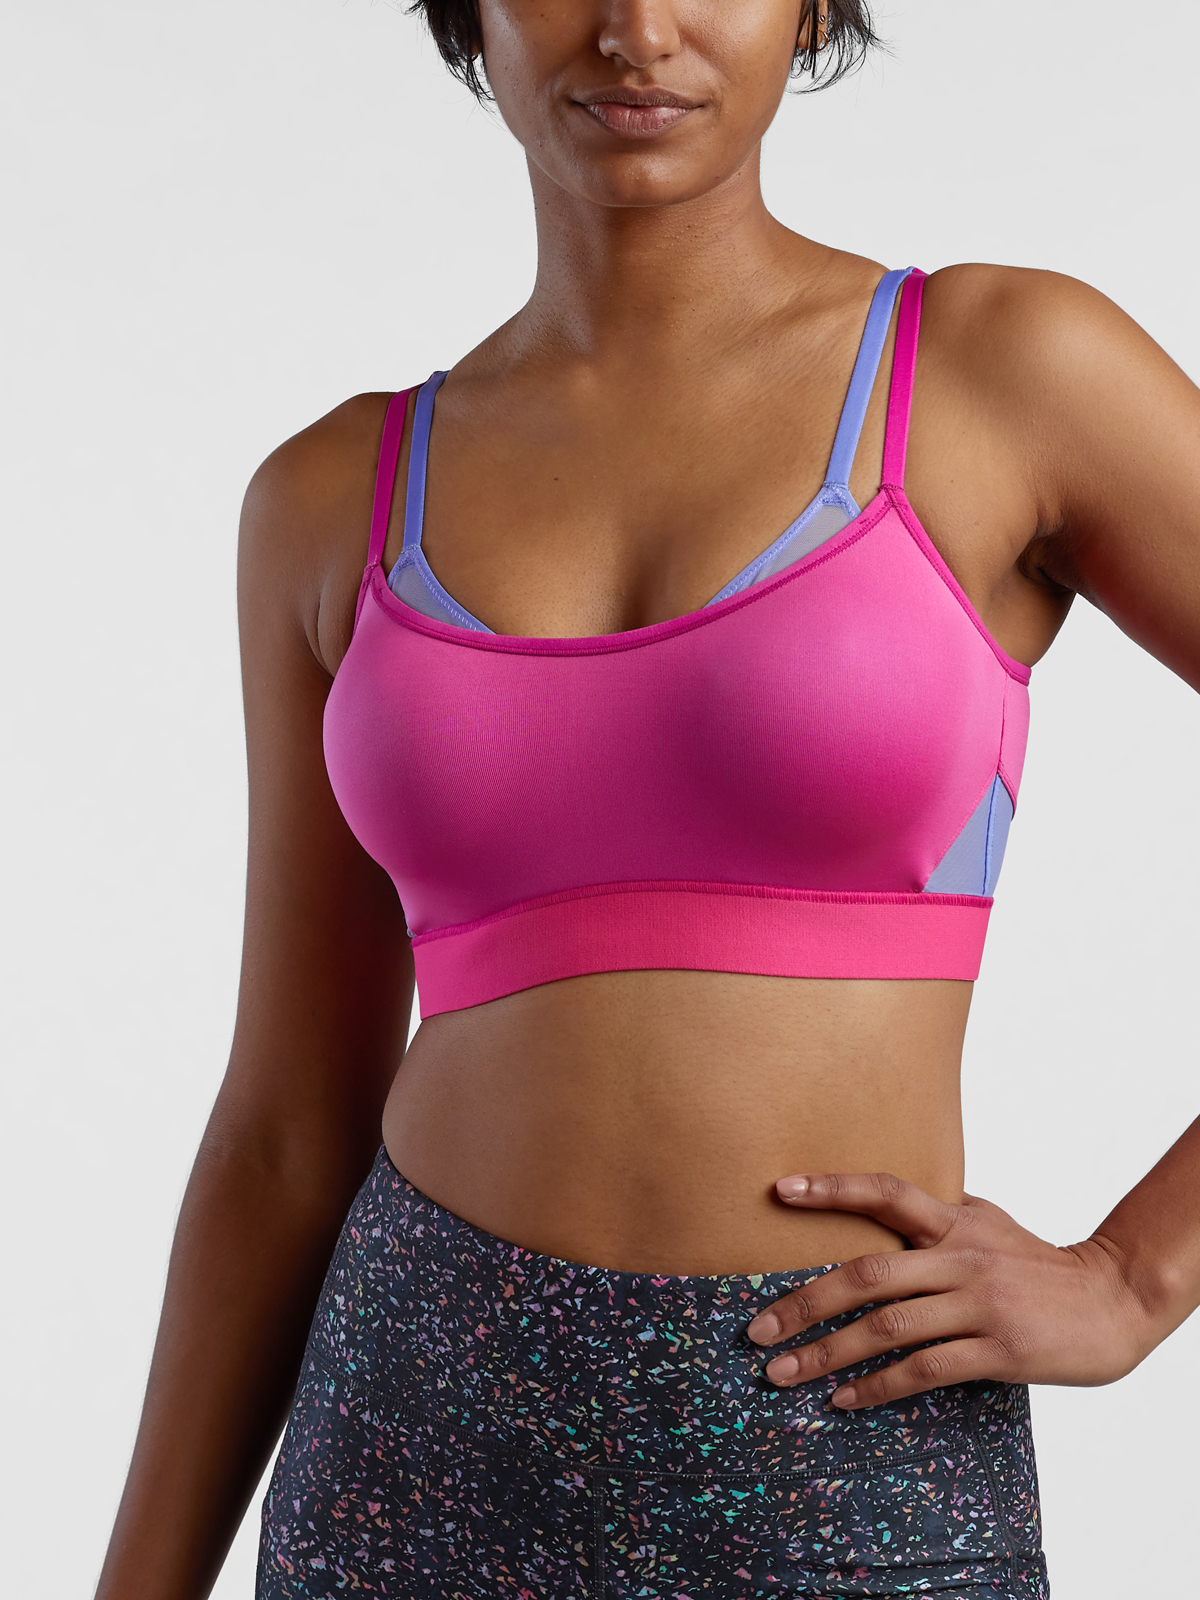 This No. 1 Bestselling Sports Bra Is the Only Workout Top You Need